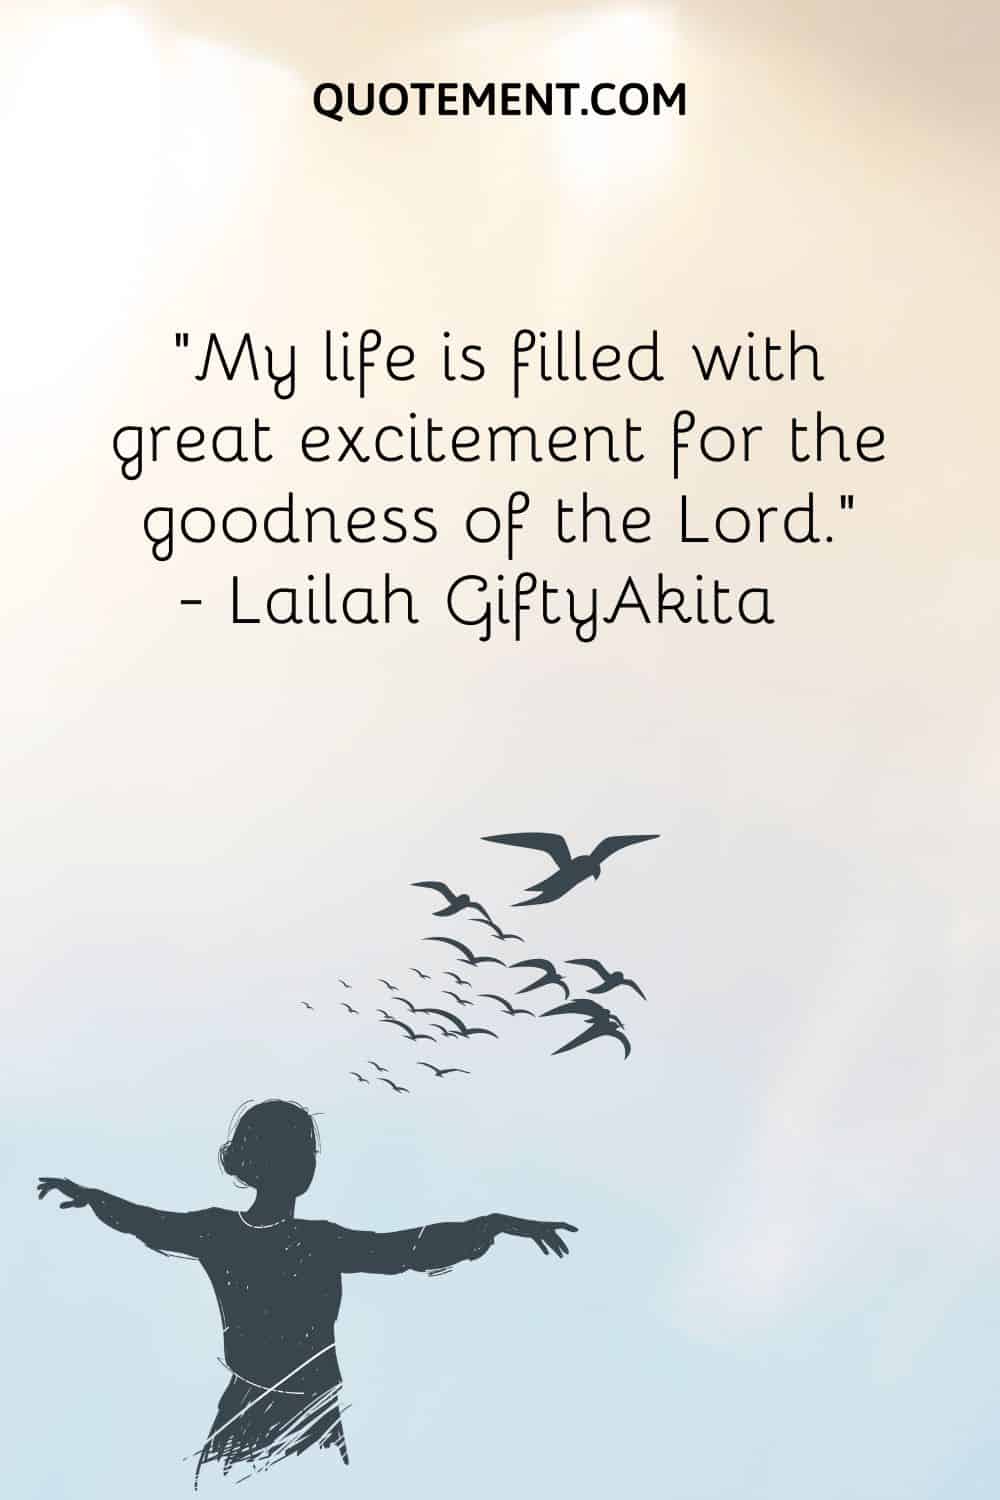 “My life is filled with great excitement for the goodness of the Lord.” ― Lailah GiftyAkita